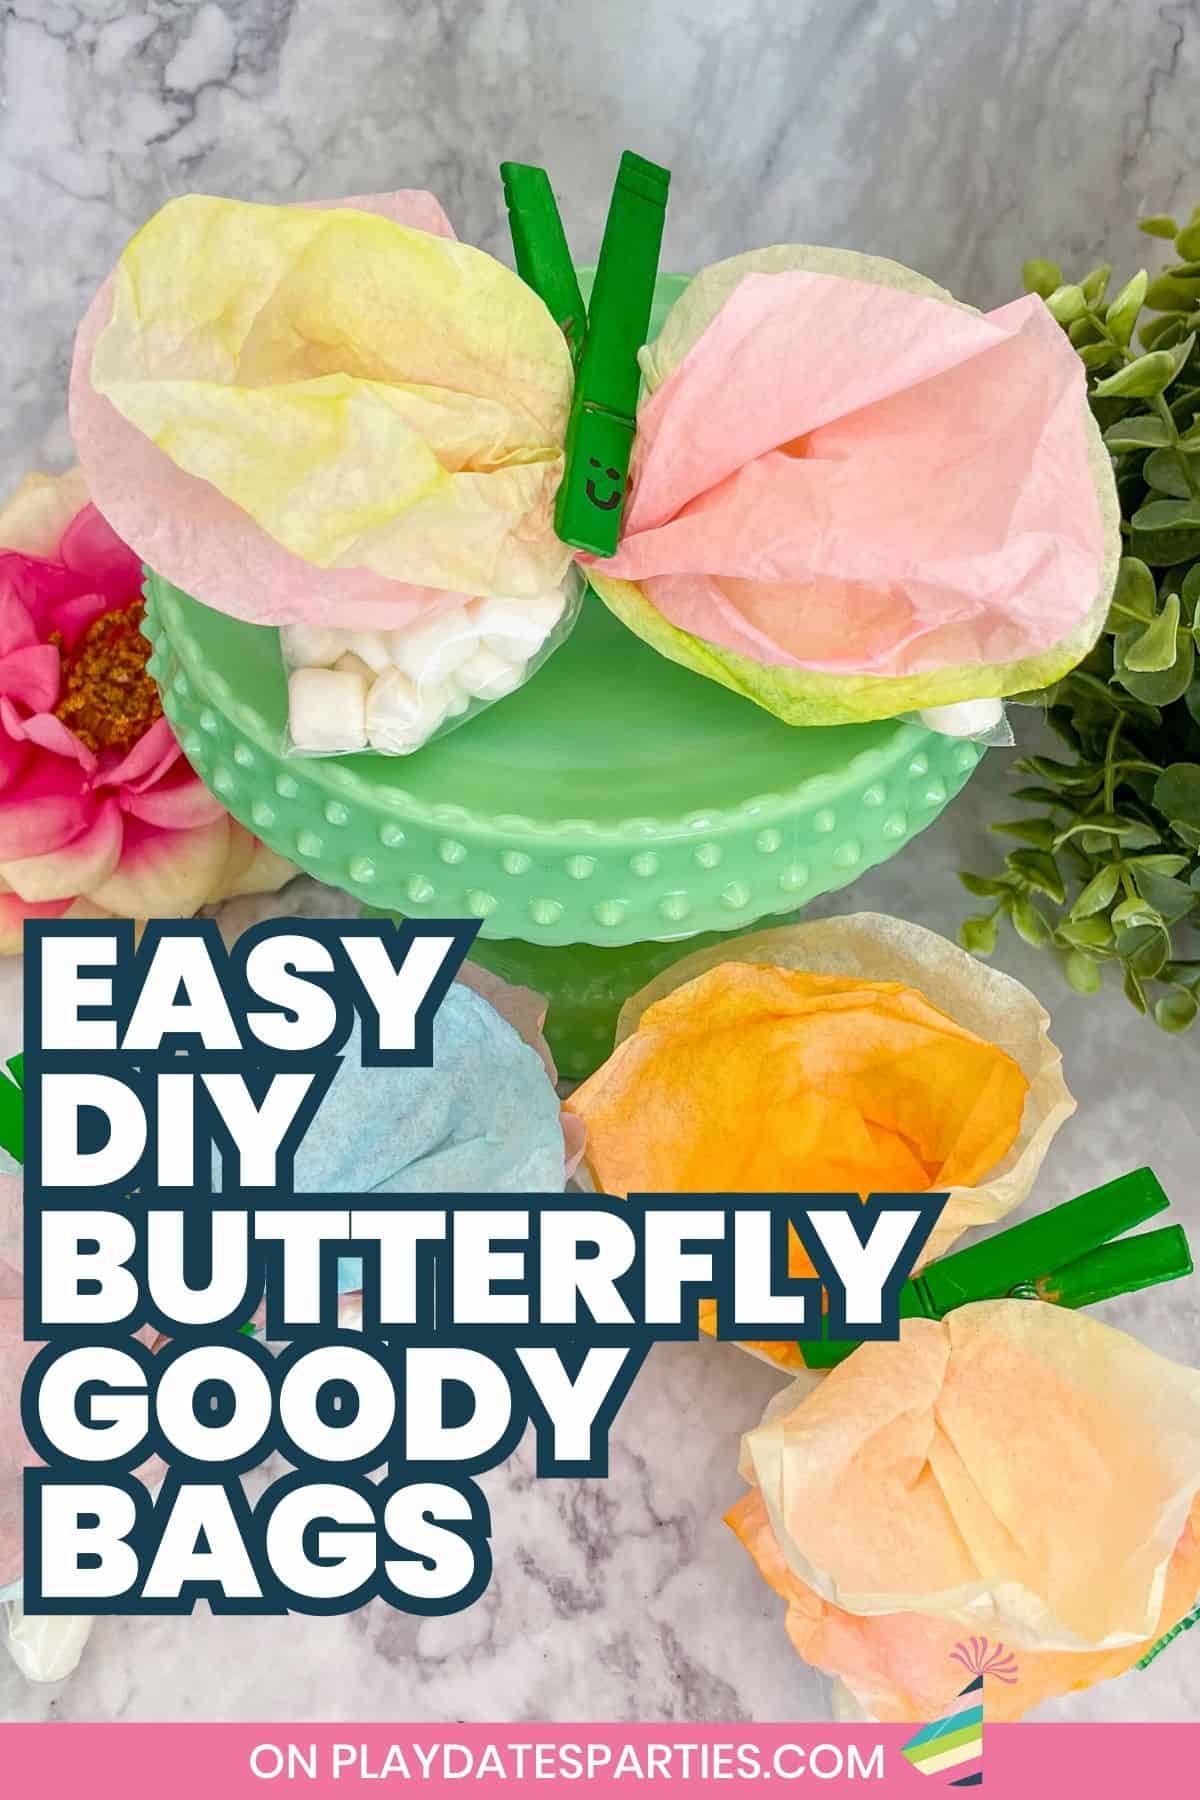 Easy DIY Butterfly Goody Bags Pin Image.